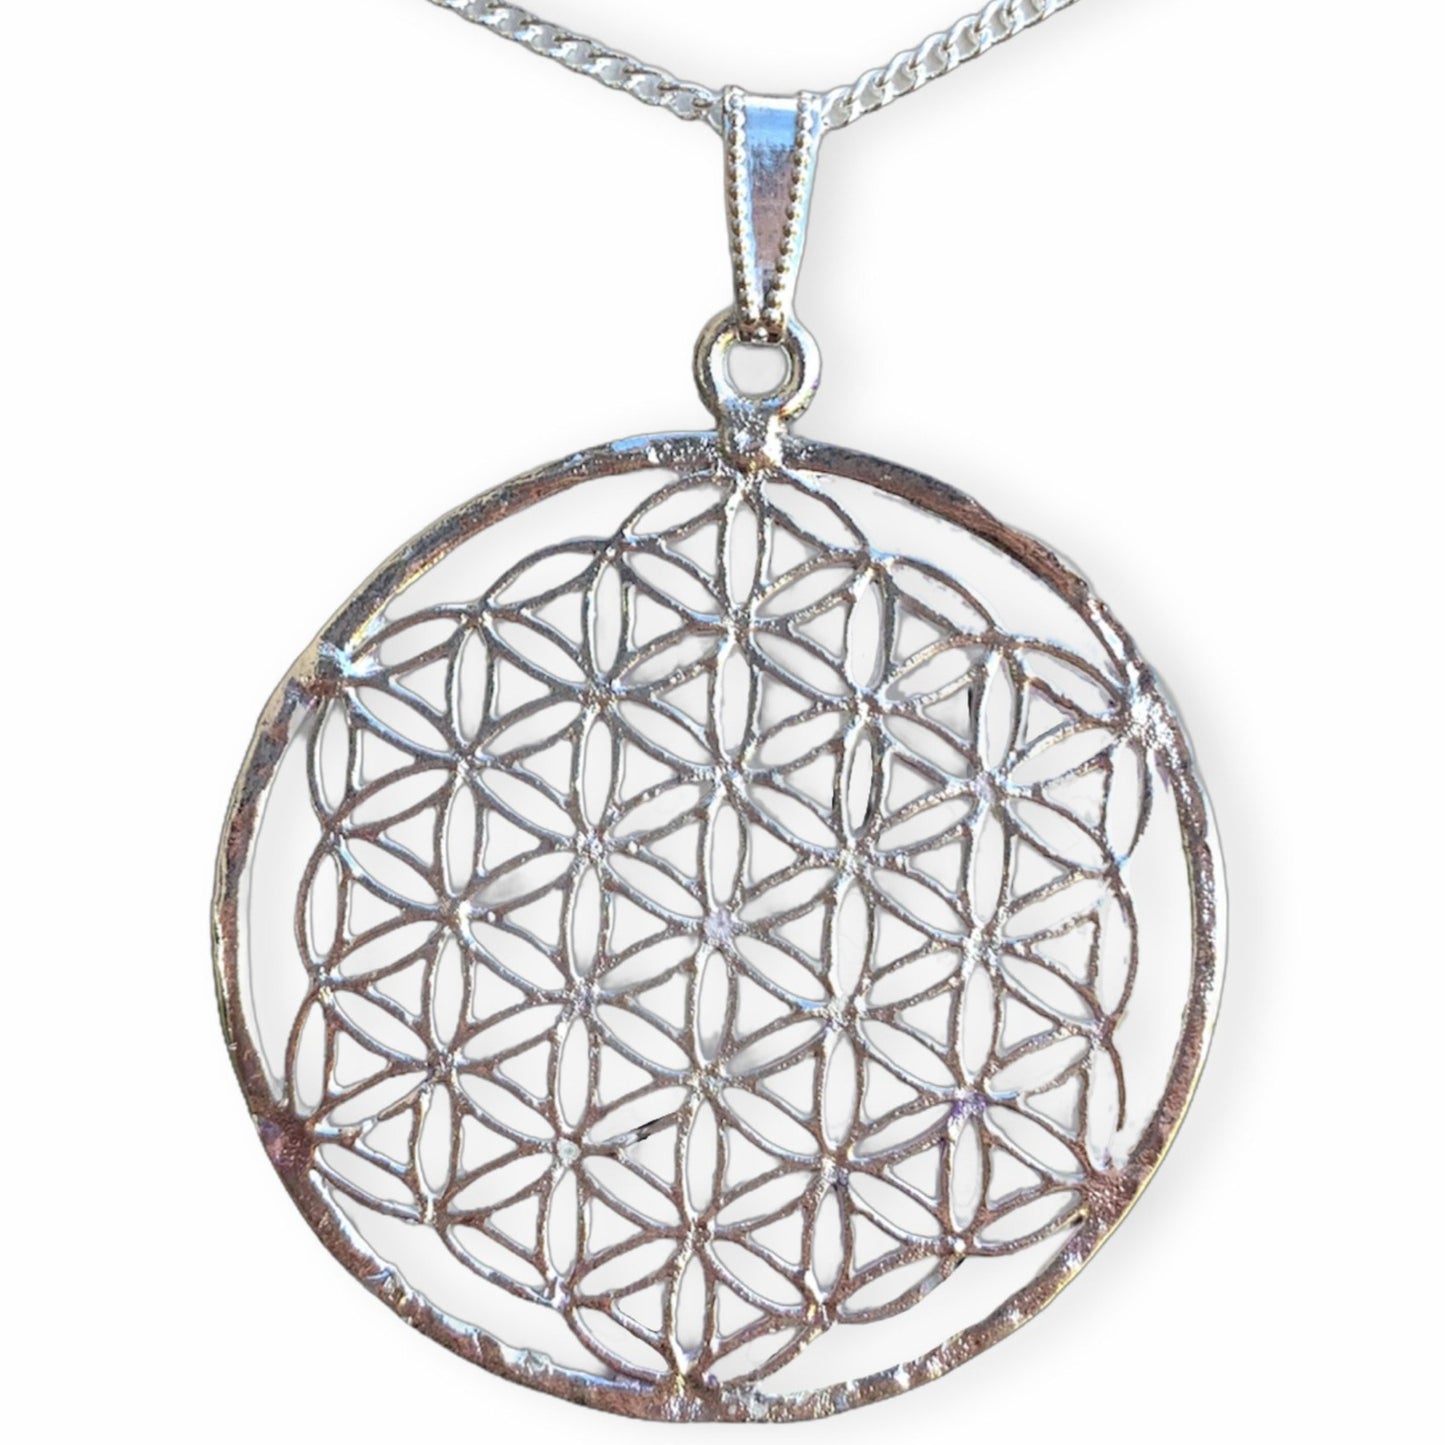 Silver Flower of Life Pendant Necklace Handmade - Magic Crystals - Necklaces